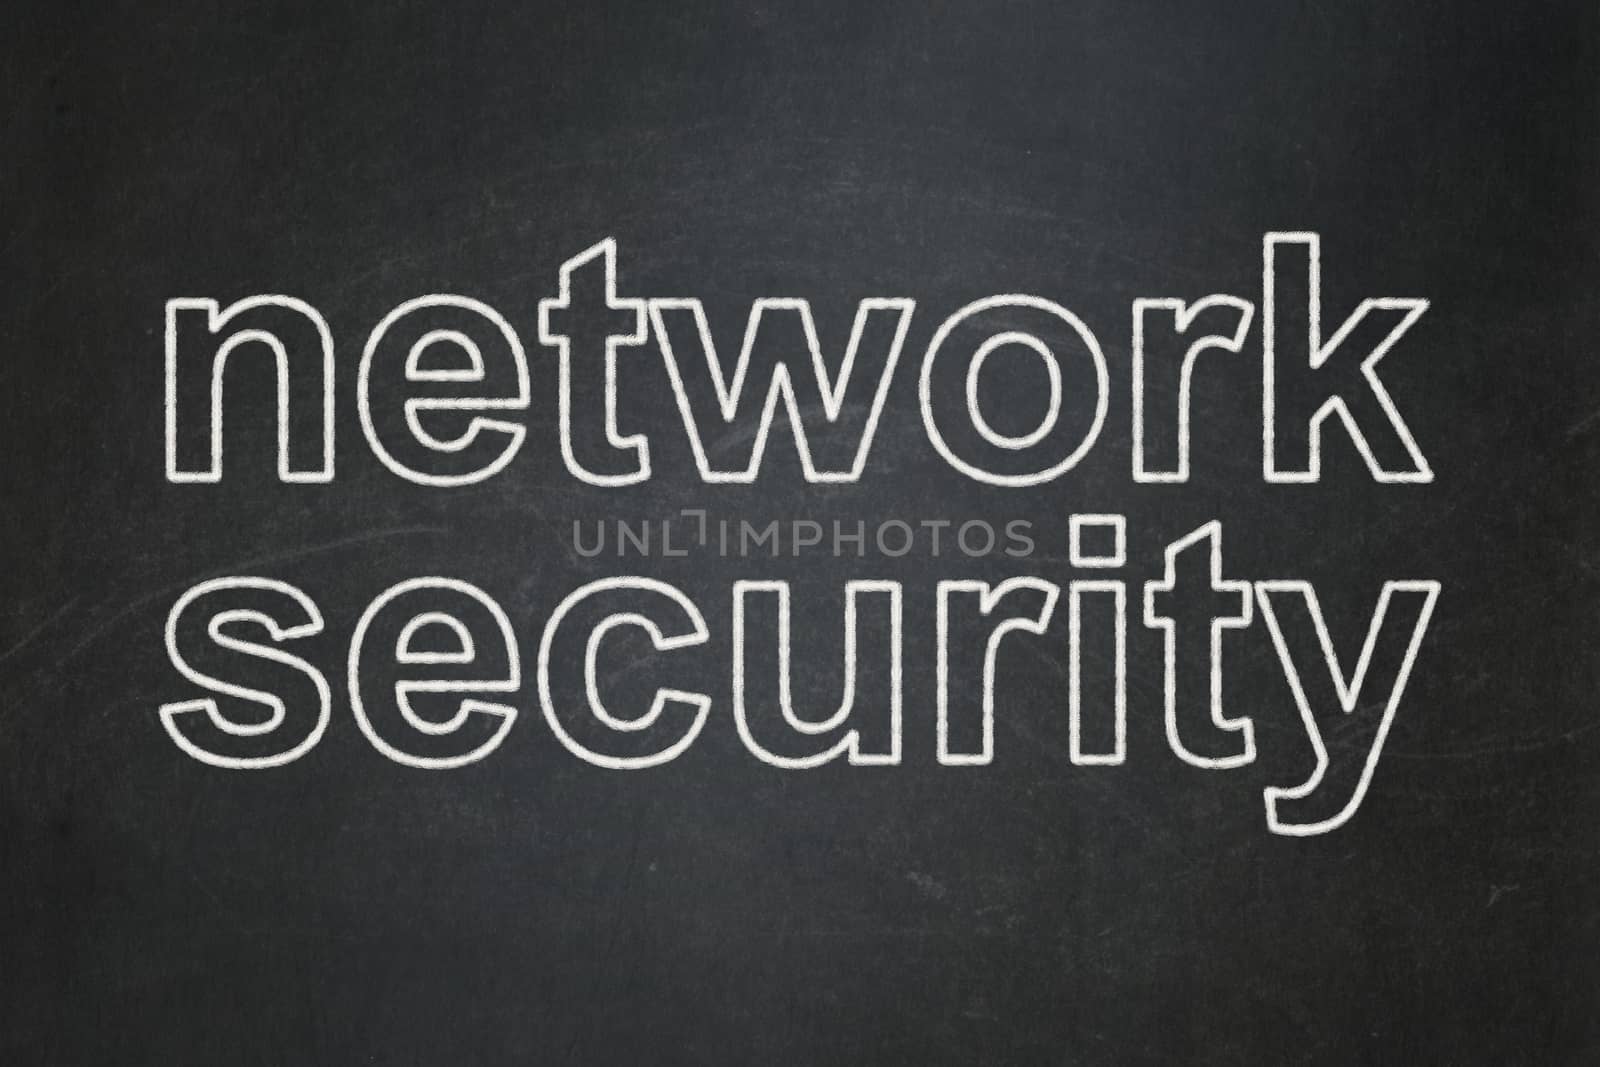 Privacy concept: Network Security on chalkboard background by maxkabakov